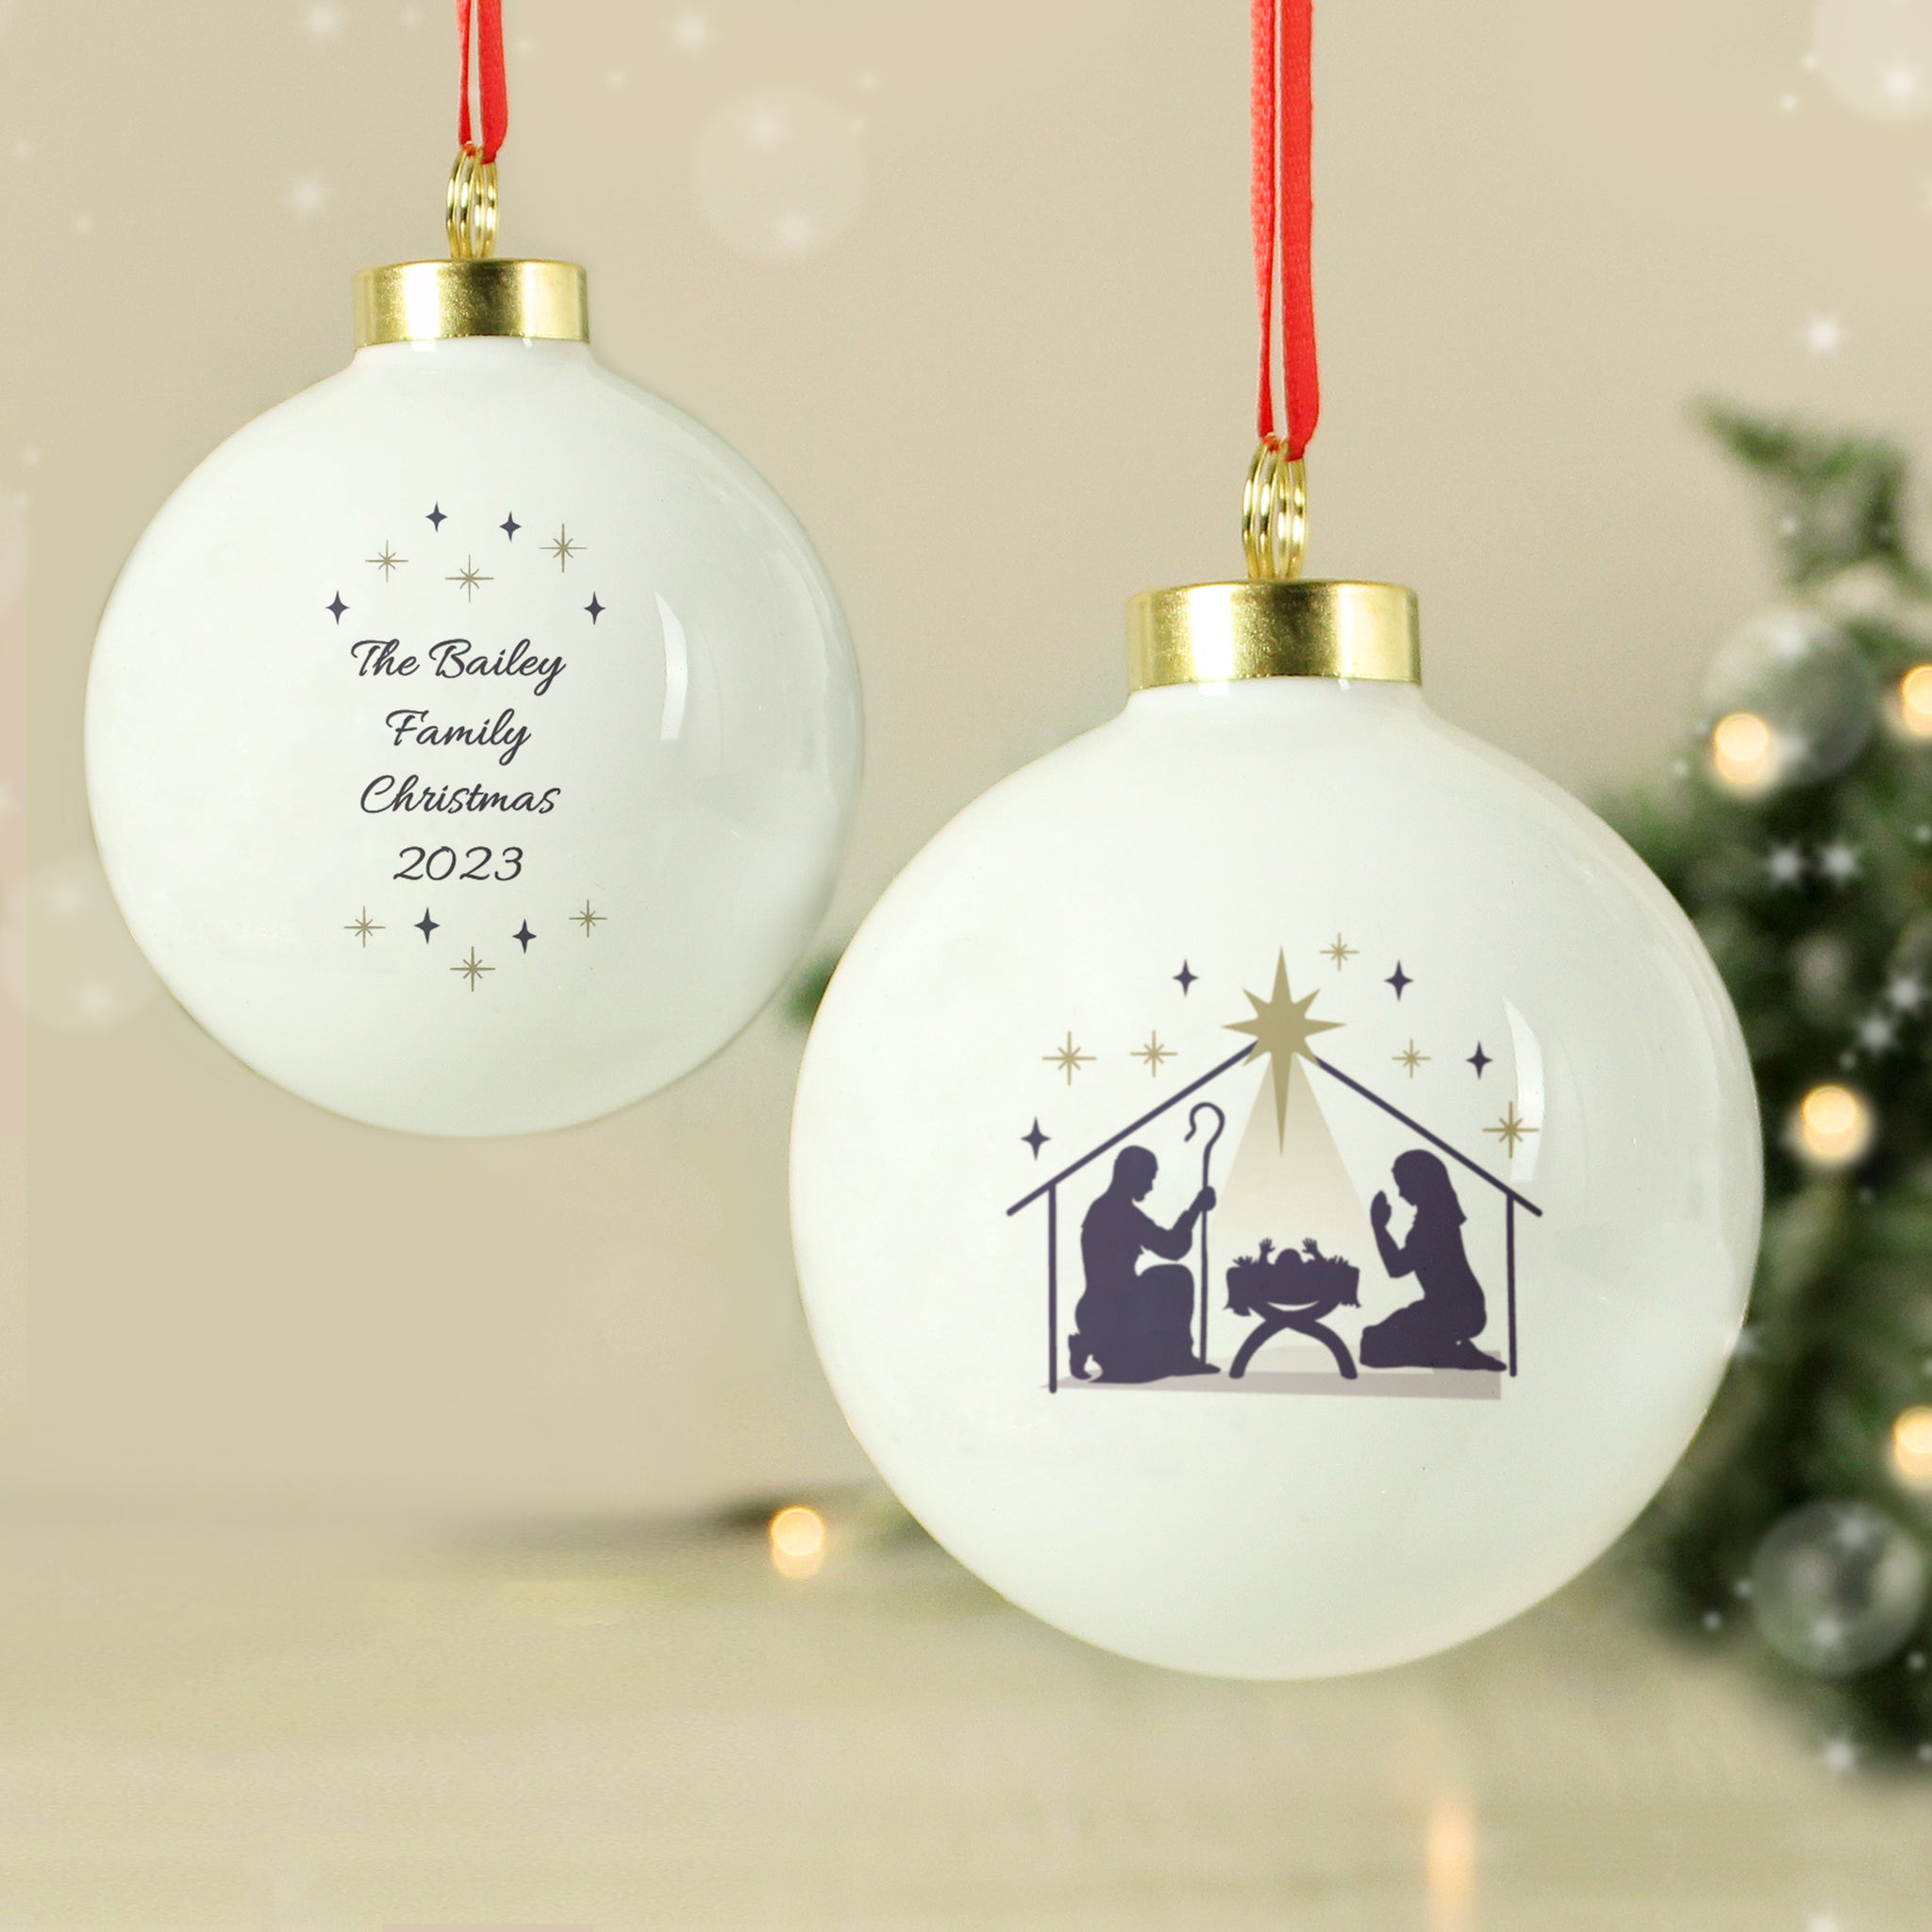 Personalised Christmas bauble with nativity scene